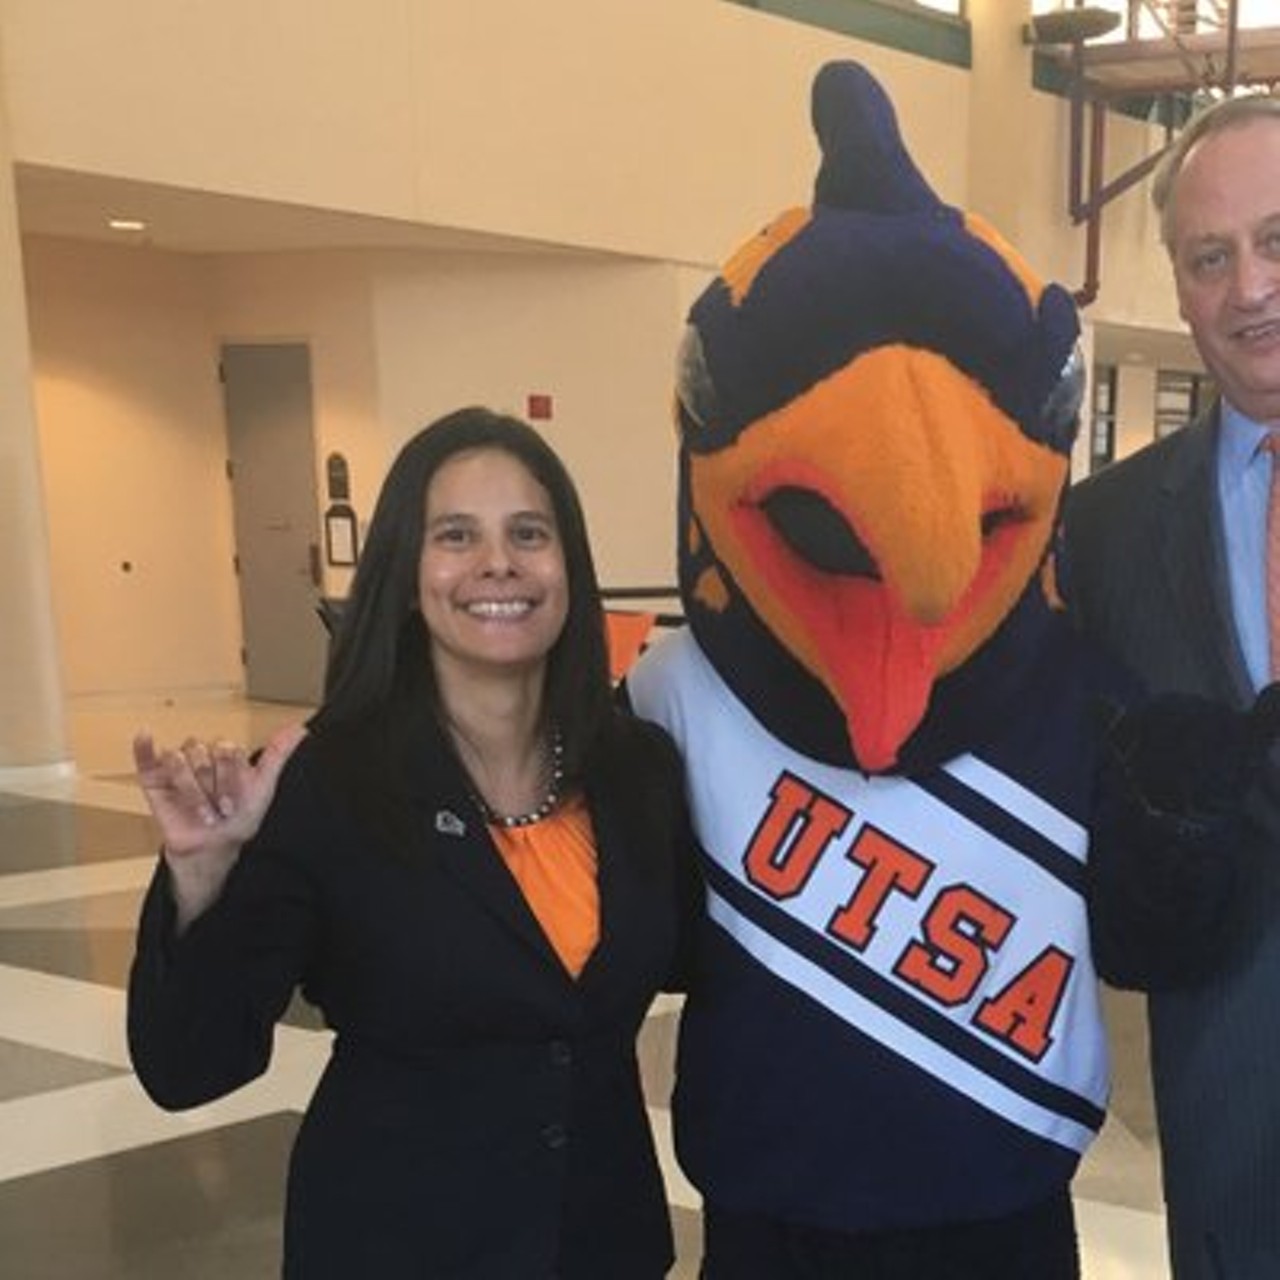 Lisa Campos
As more women demand to take up the same space as men in sports and athletics, more women will achieve notable titles. Such is the case for Lisa Campos, UTSA’s athetic director since 2017. The Colorado native worked her way up – she spent nearly a decade as assistant athletic director at UT at El Paso, where she also received her doctorate degree. Yep, Lisa Campos is one badass lady.
Photo via Twitter / @LisaUTSA